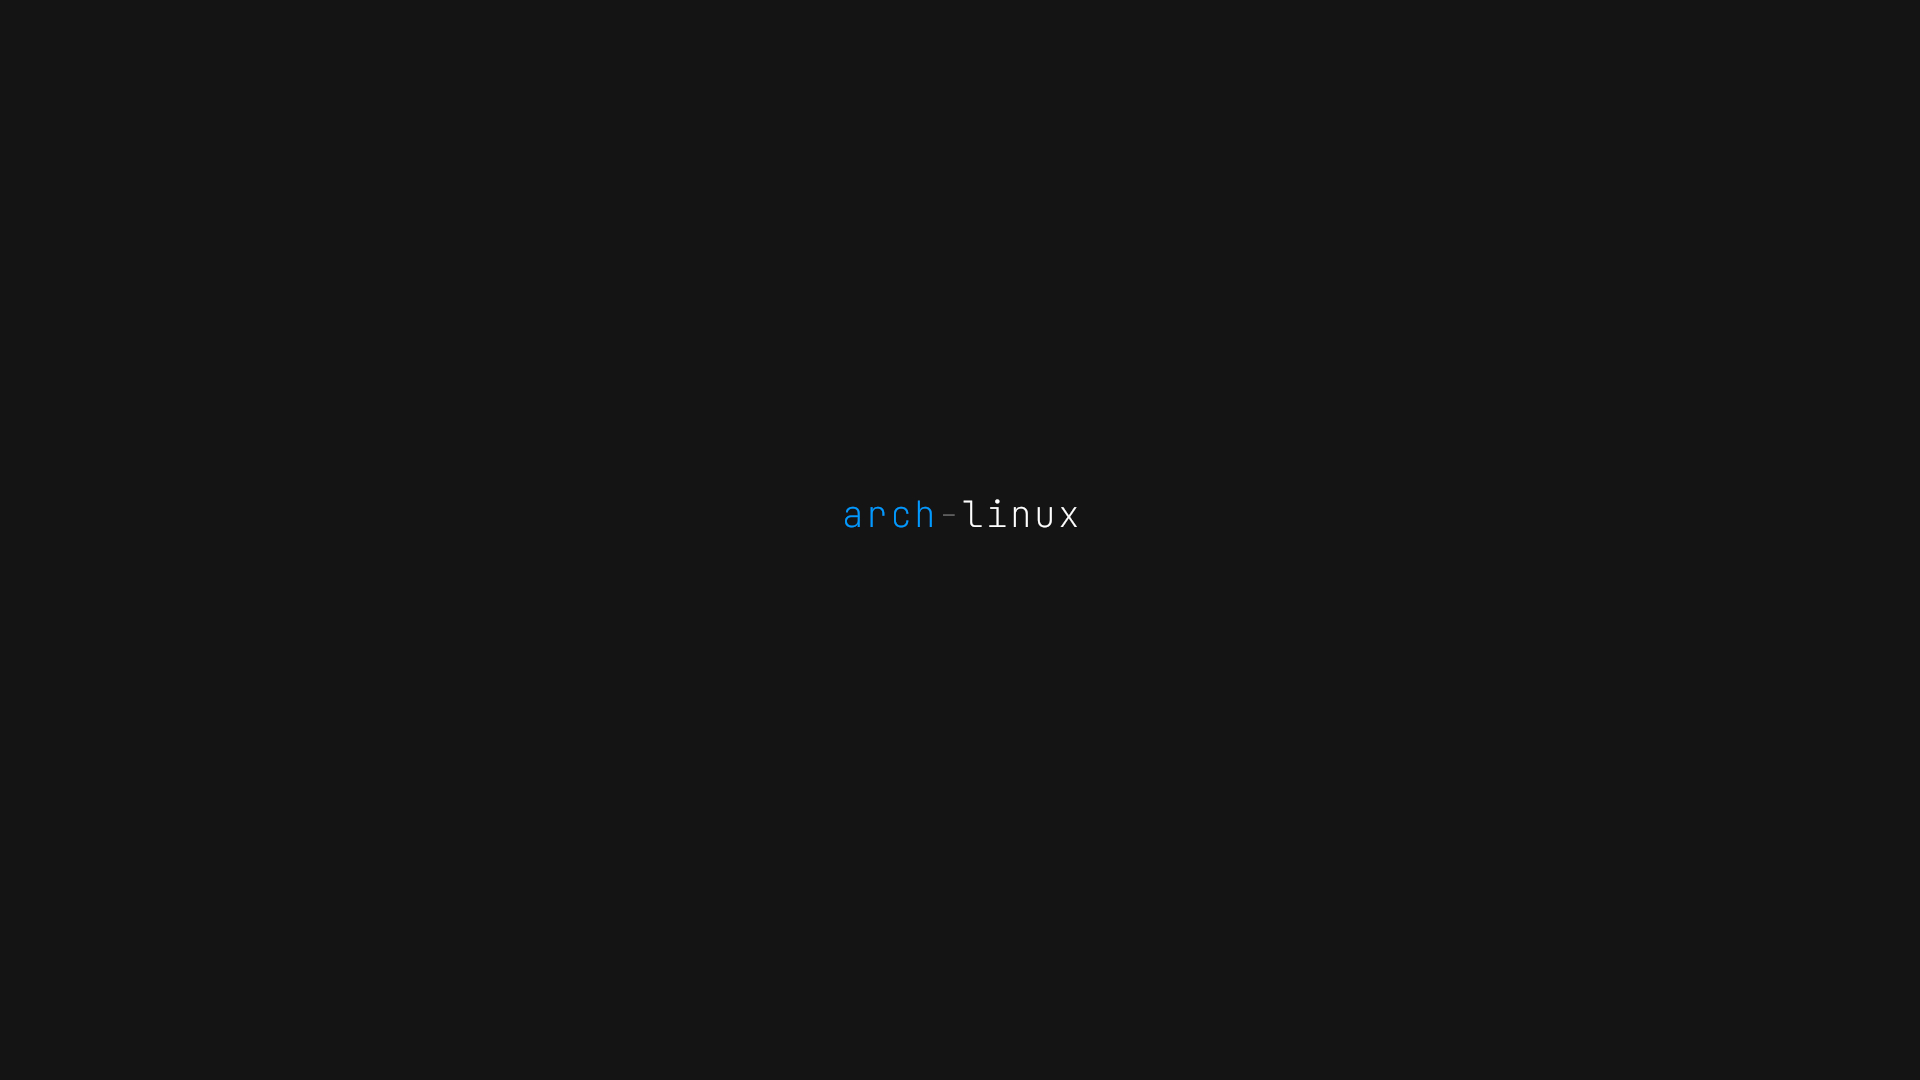 Arch Linux Linux Minimalism Simple Background Dark Operating System 1920x1080